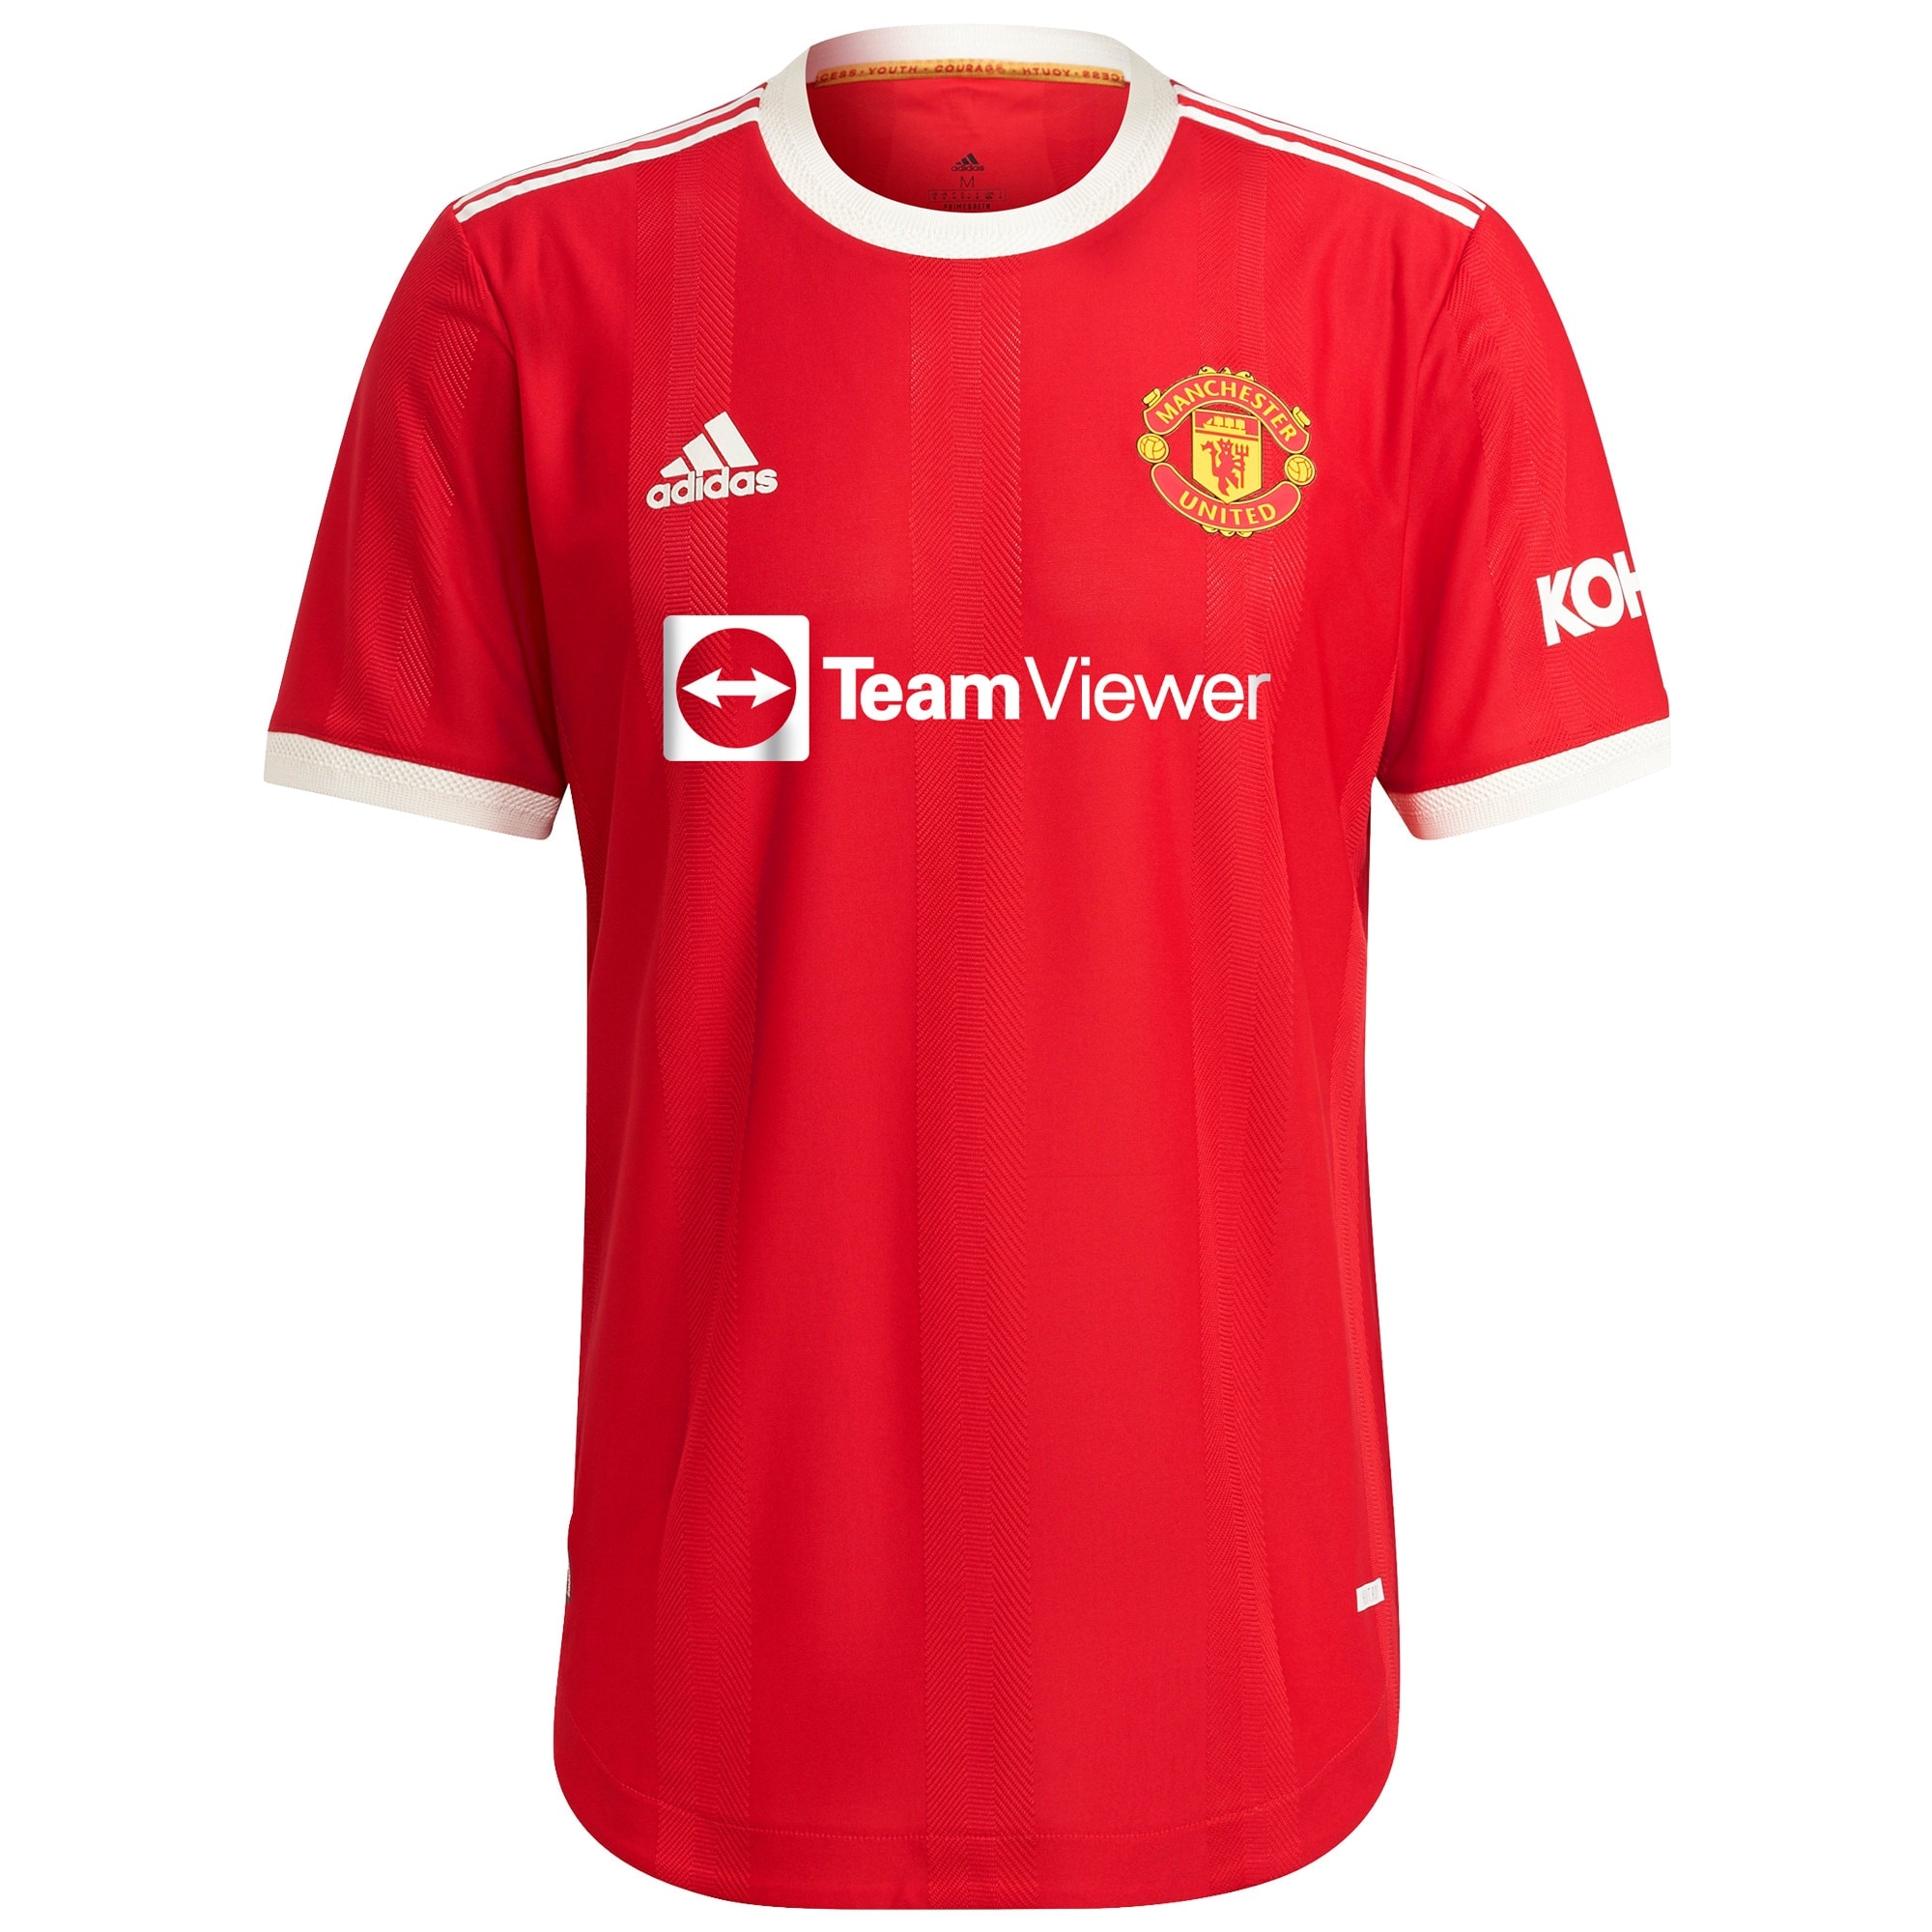 Manchester United Cup Home Authentic Shirt 2021-22 with Cavani 21 printing